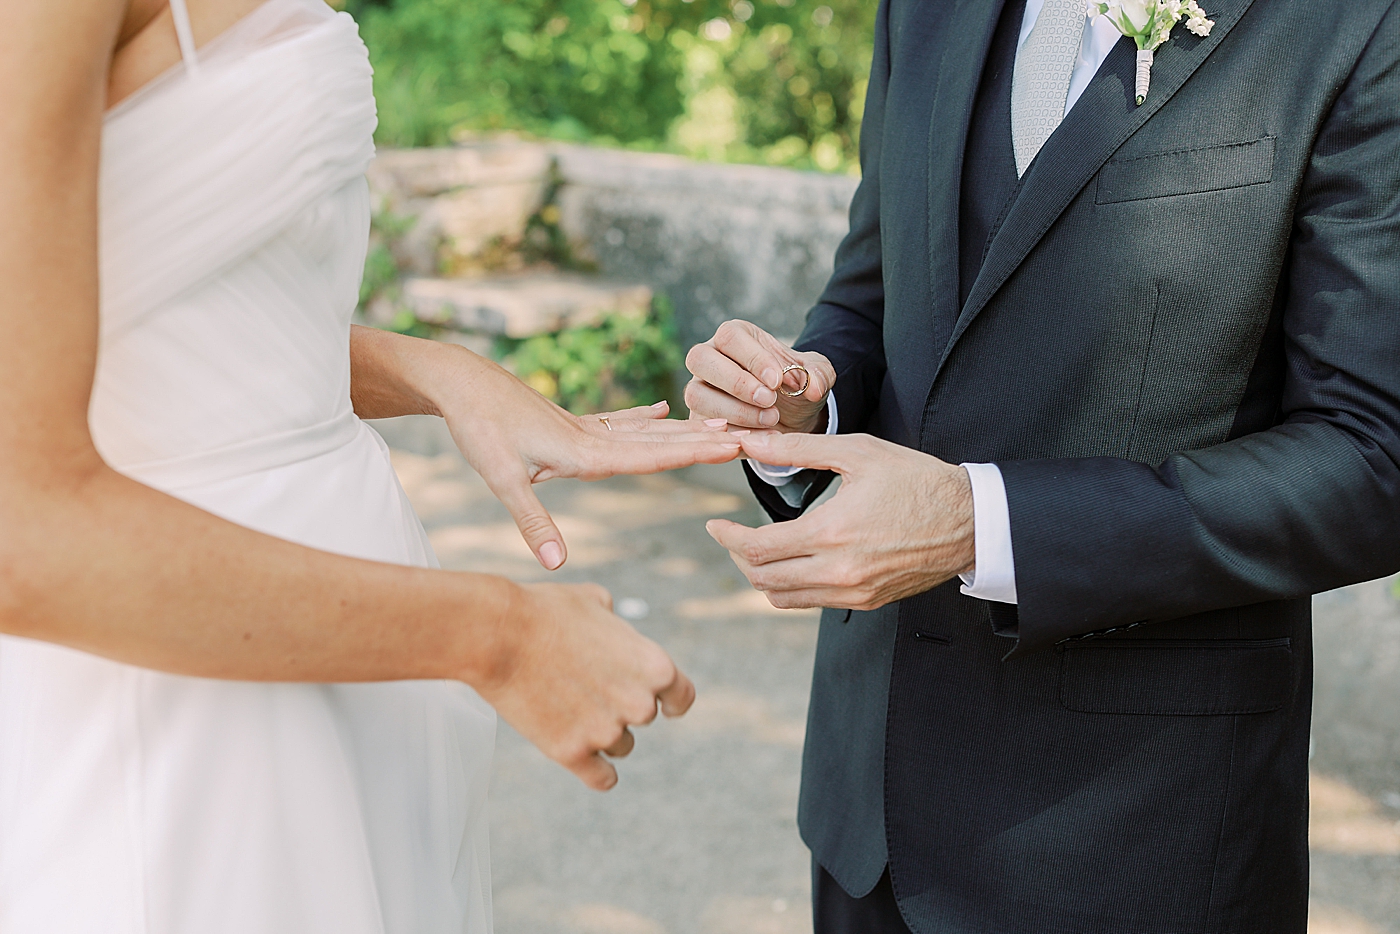 Bride and groom exchanging rings | Photo by Diane Sotero Photography